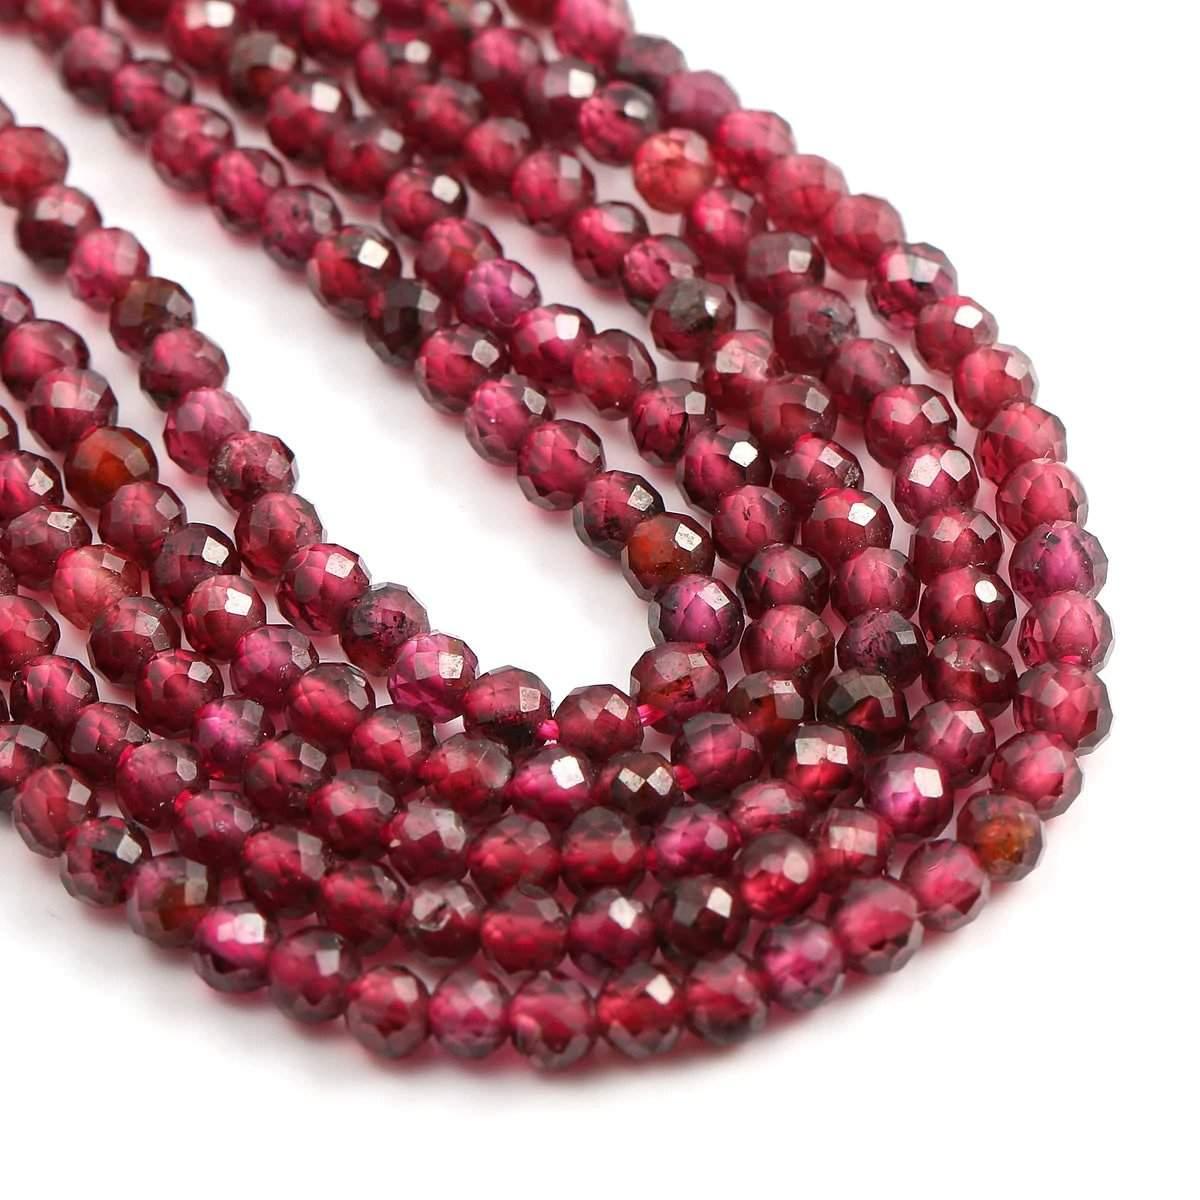 Natural Faceted Red Garnet Beads, size 4-10mm, Round, 15.5'' strand 